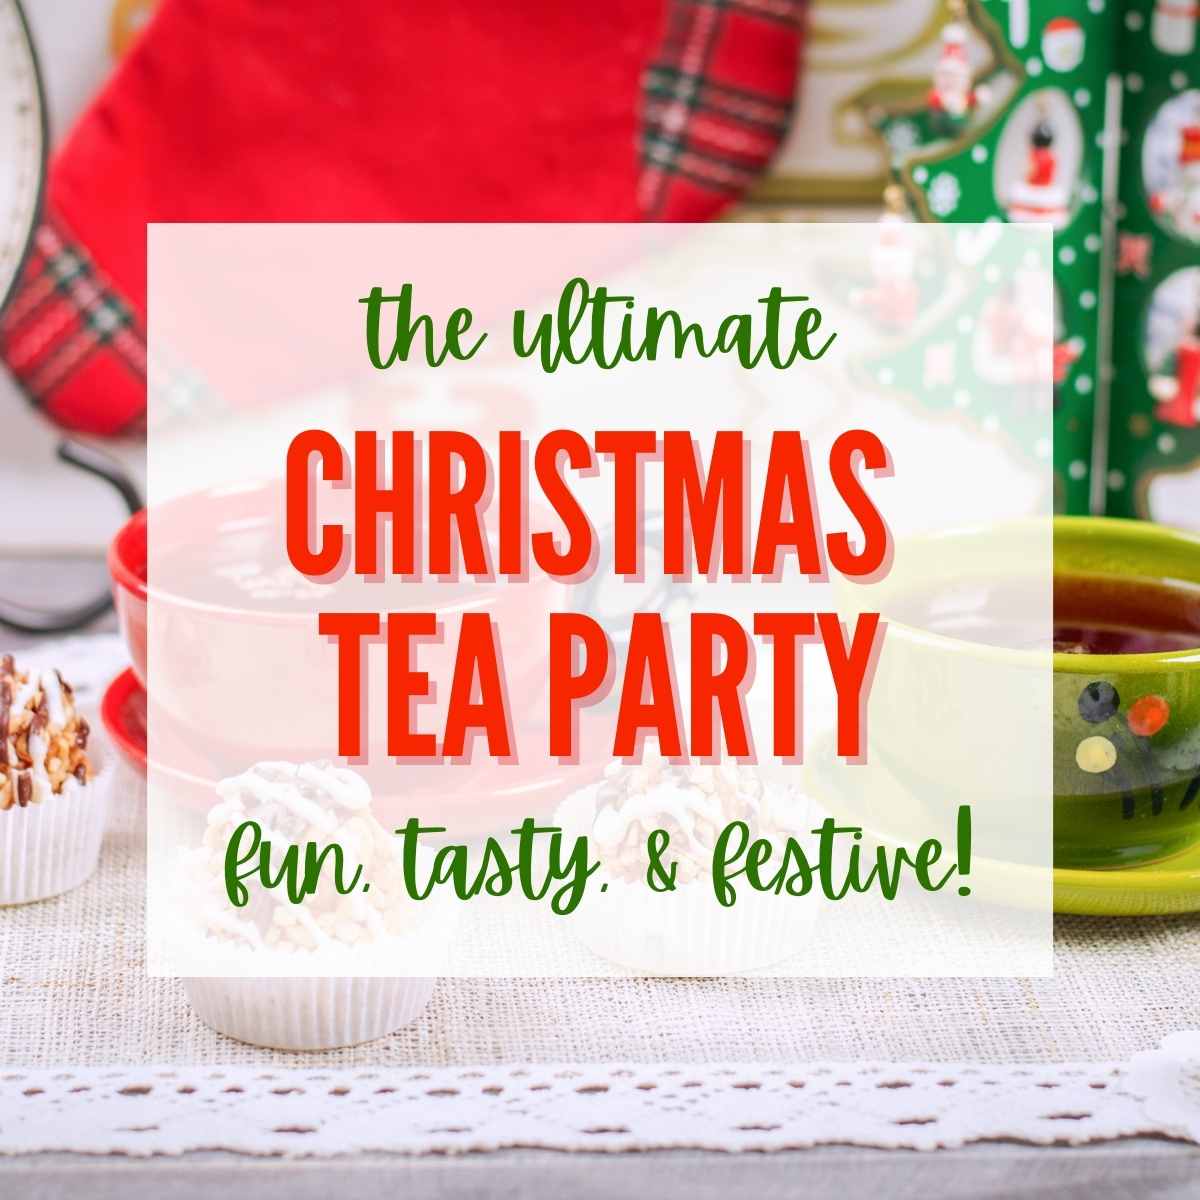 Christmas tea party with desserts with text overlay.